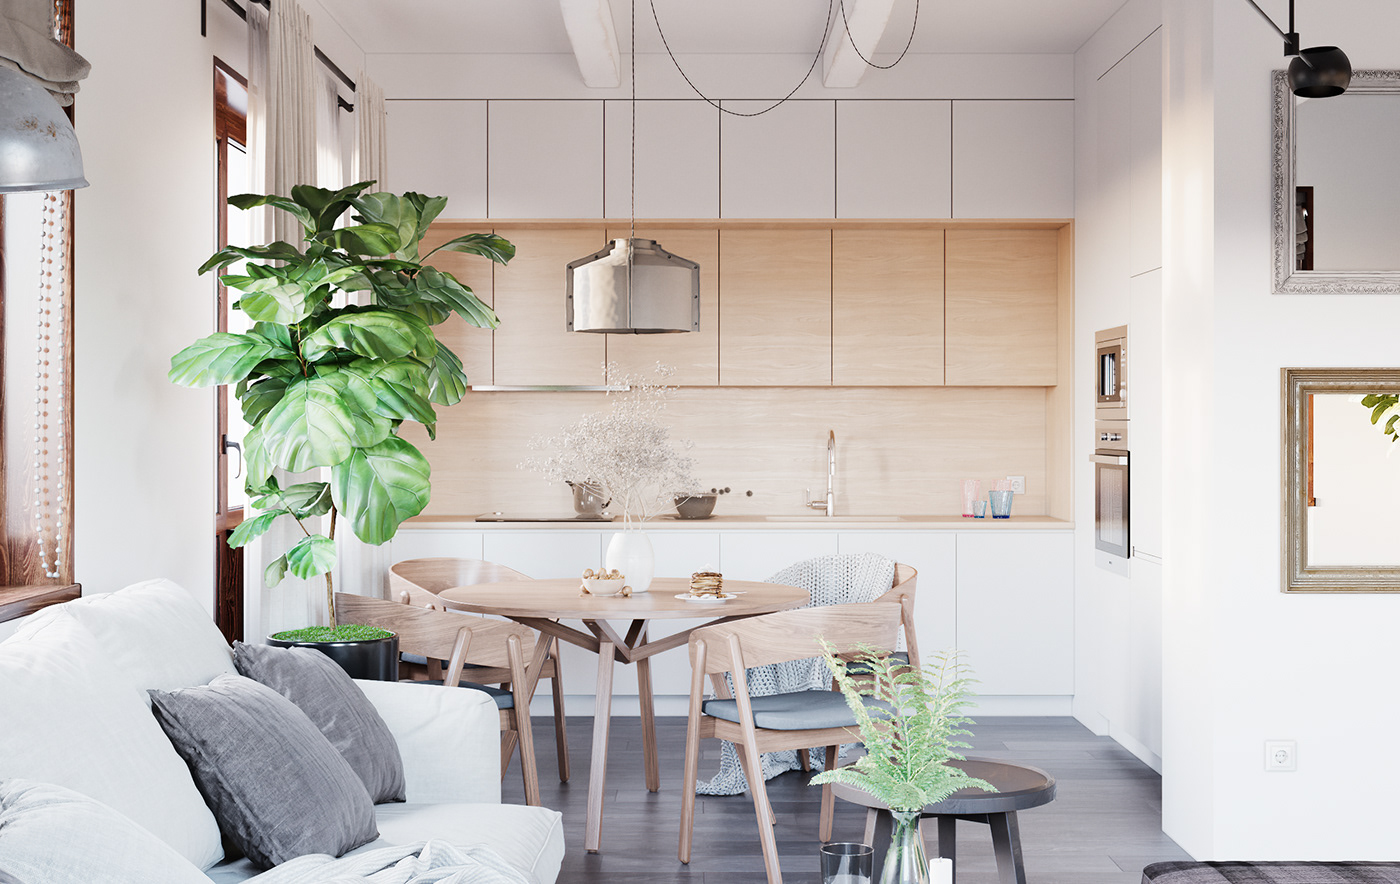 The kitchen, living room, and dining table are connected to create a sense of seamless space. Kitchen and dining room with compact area but still fully furnished and usable.